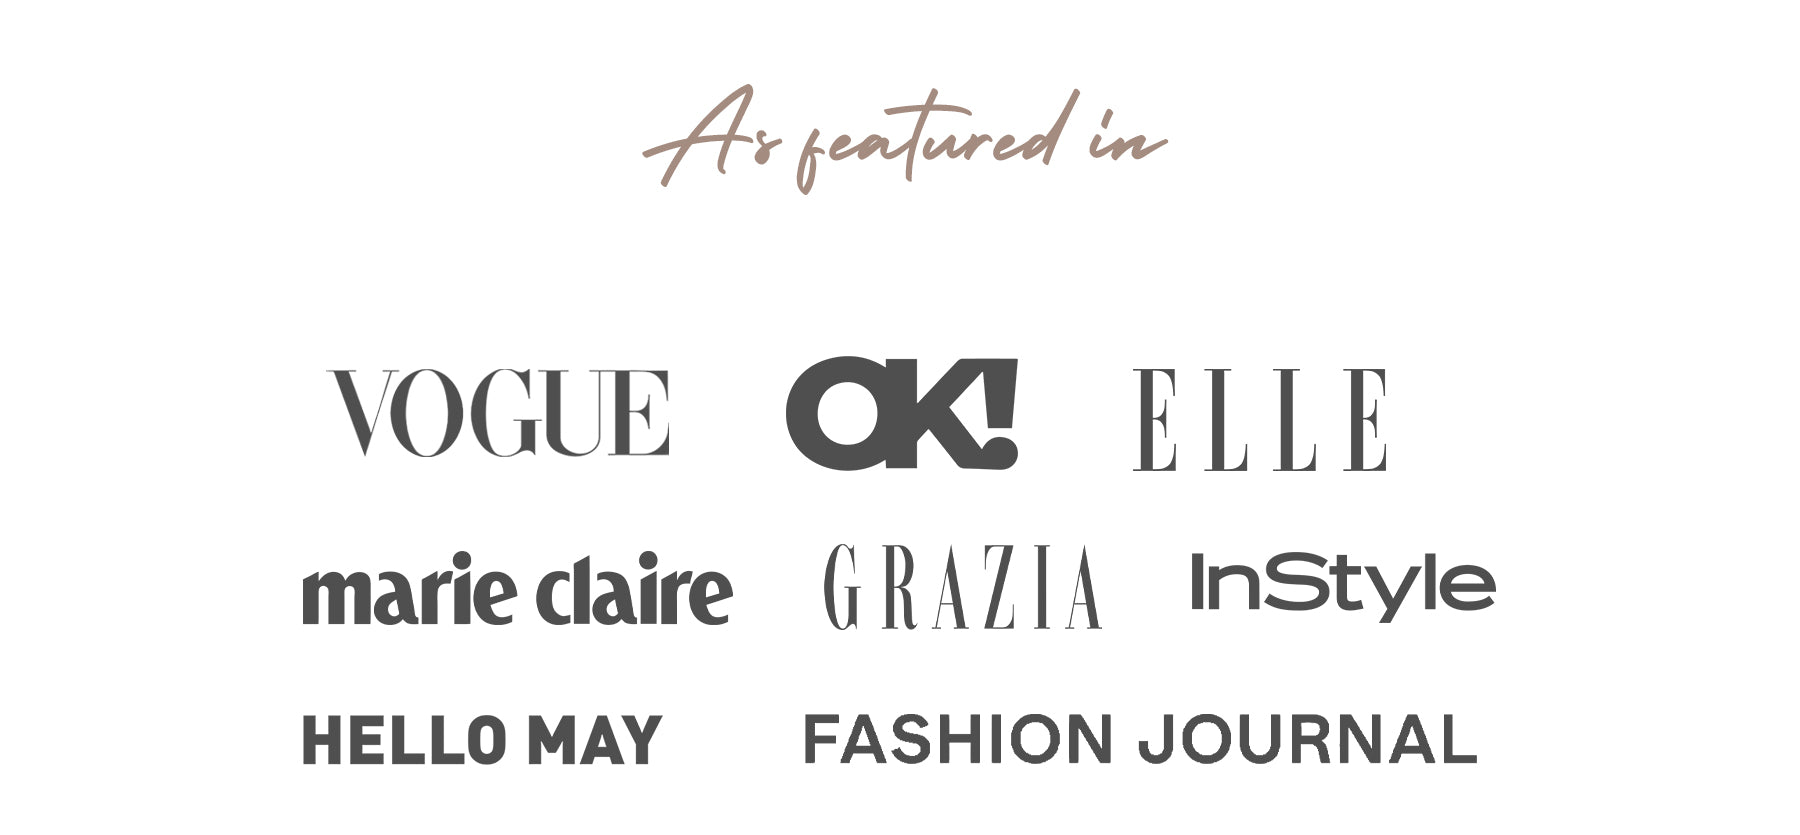 Text "As featured in" followed by a collage of magazine logos of Vogue, Elle, Marie Claire, Grazia, InStyle, and Hello May